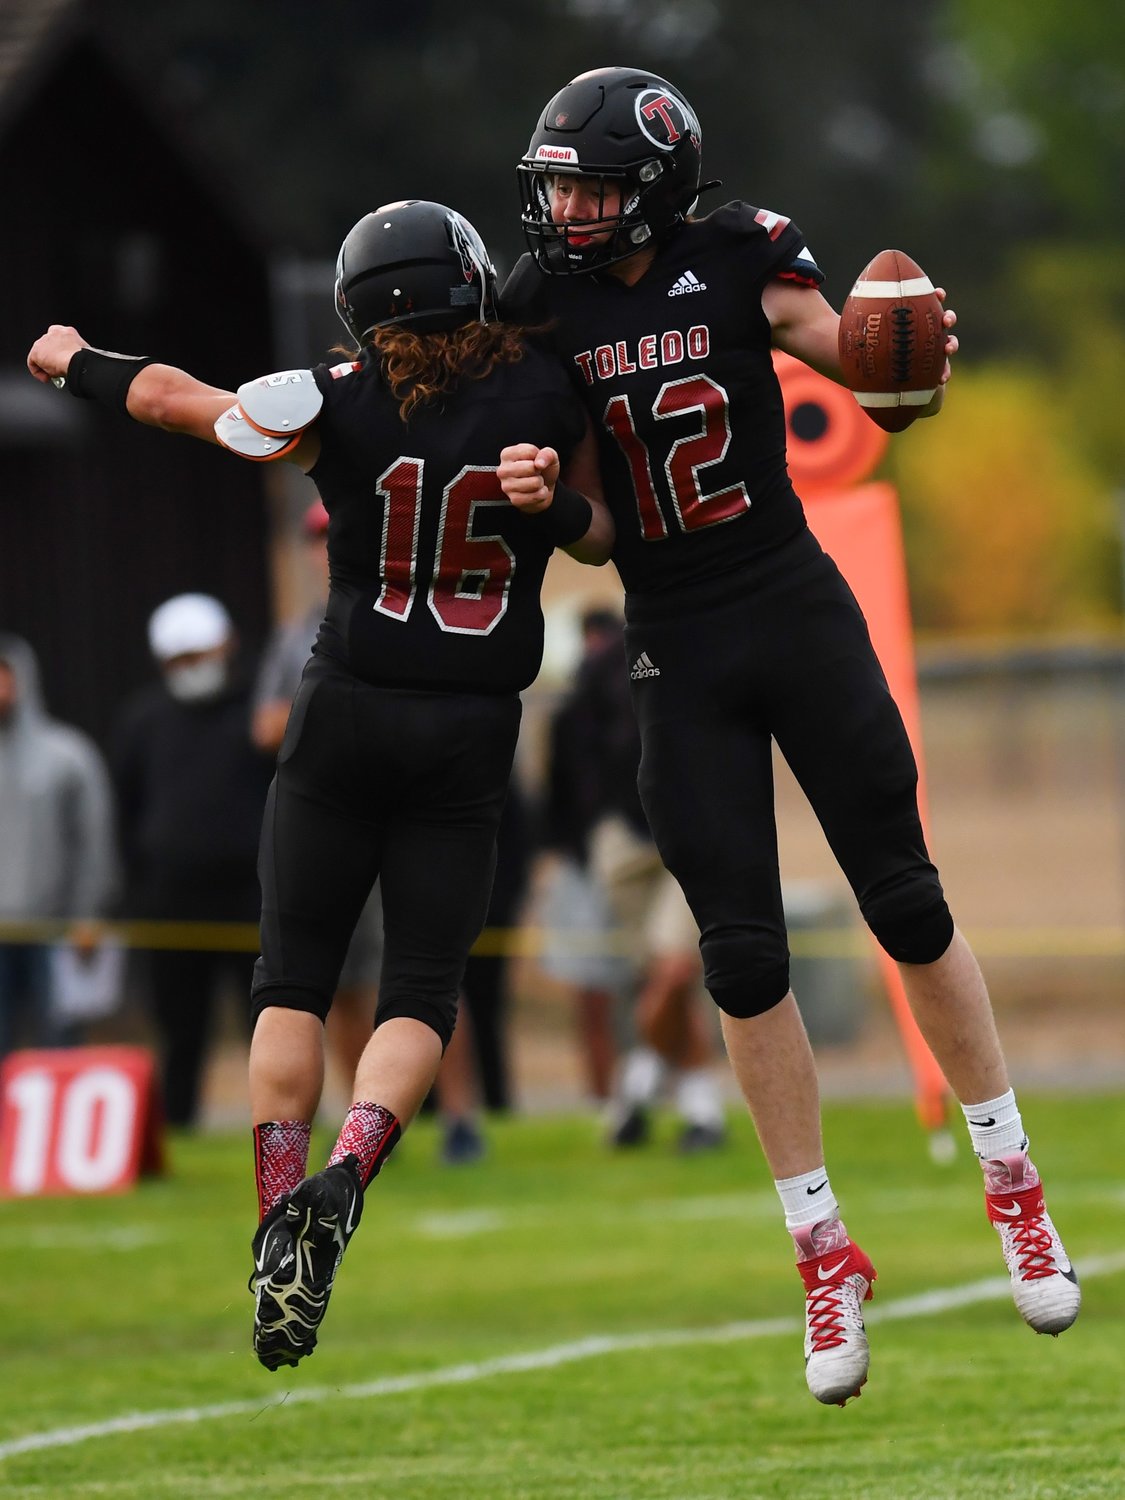 Carson Olmstead (12) celebrates his touchdown with teammate Zane Raney (16) on Friday.